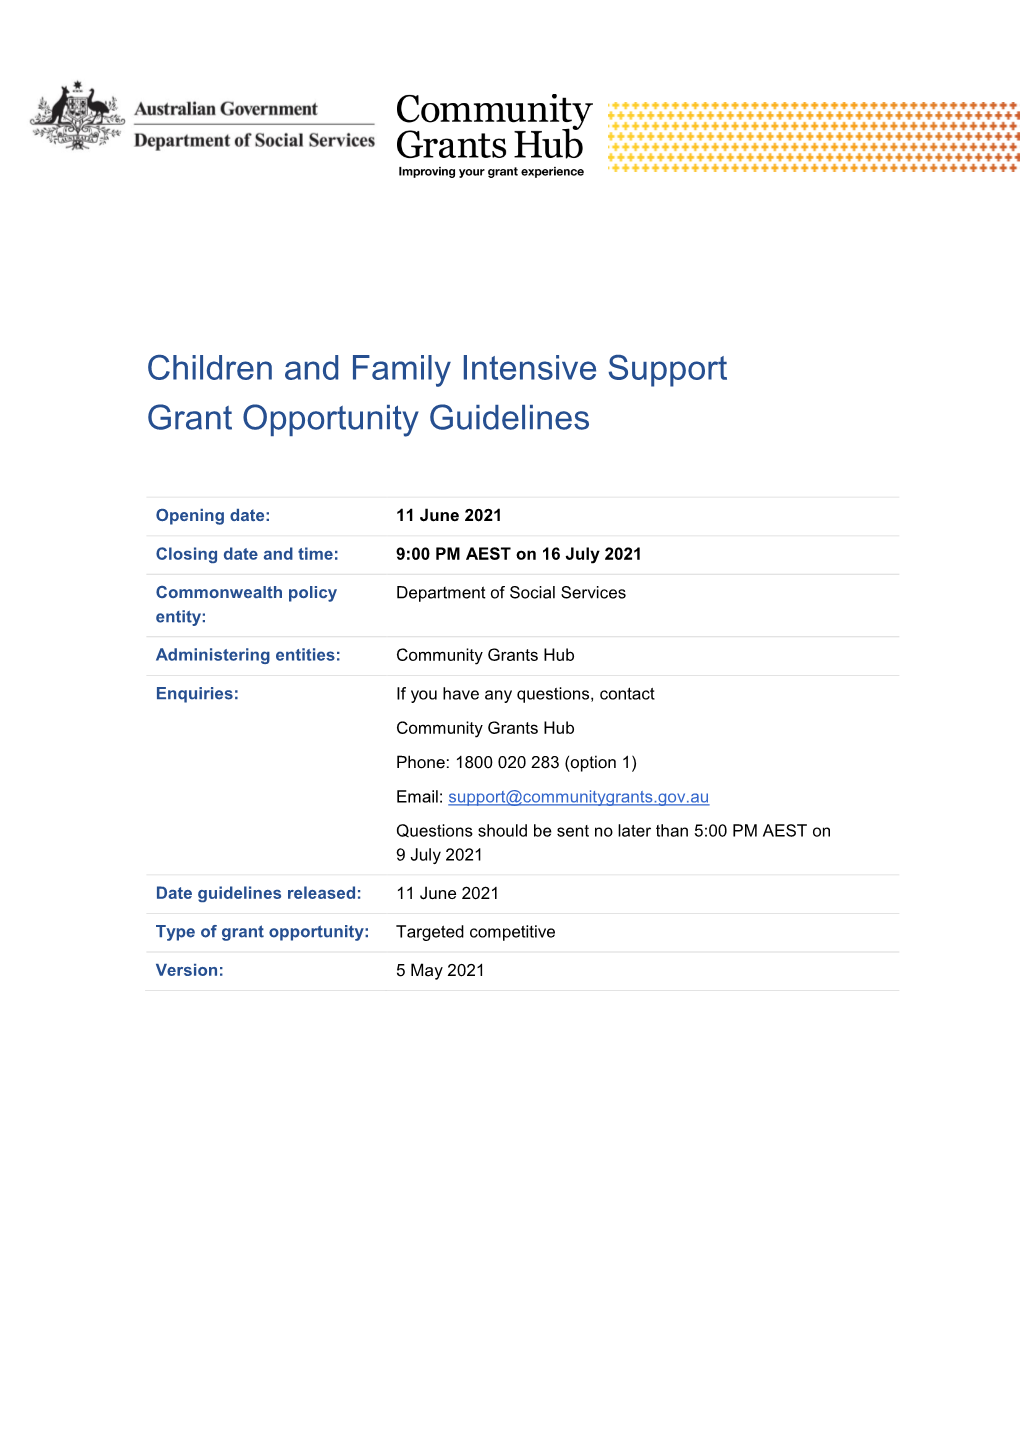 Children and Family Intensive Support Grant Opportunity Guidelines